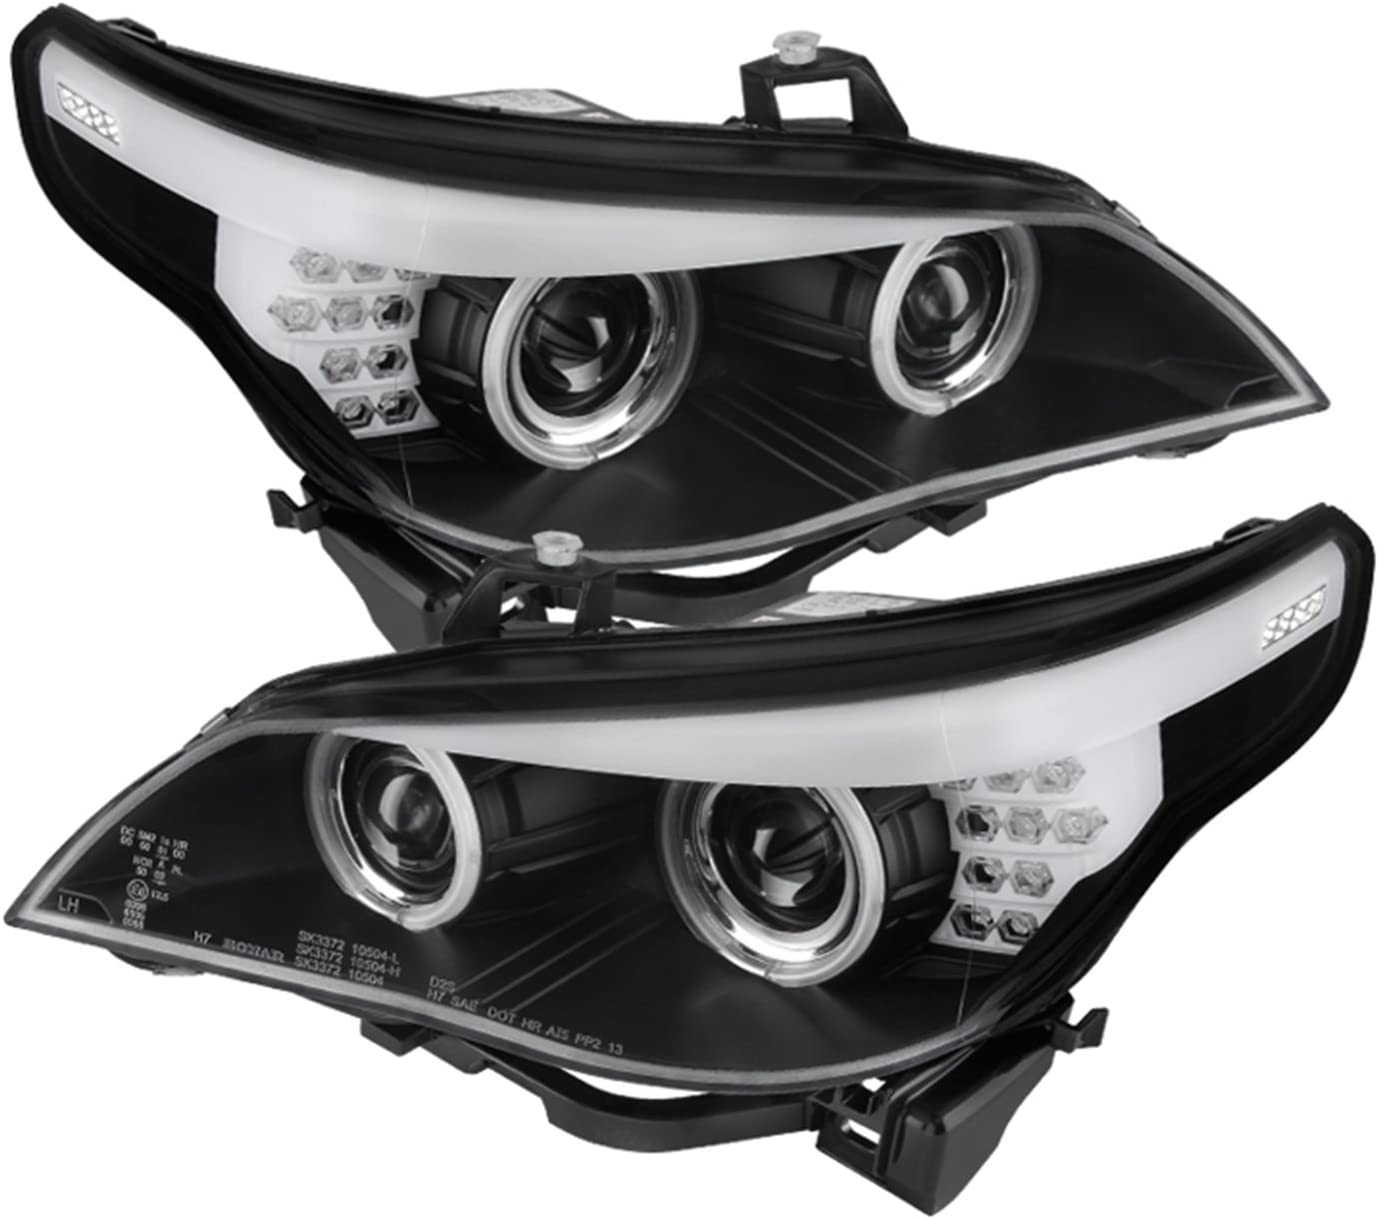 Spyder 5074041 BMW E60 5-Series 04-07 Projector Headlights - Halogen Model Only (Not Compatible With Xenon/HID Model) - CCFL Halo - Black (Black)